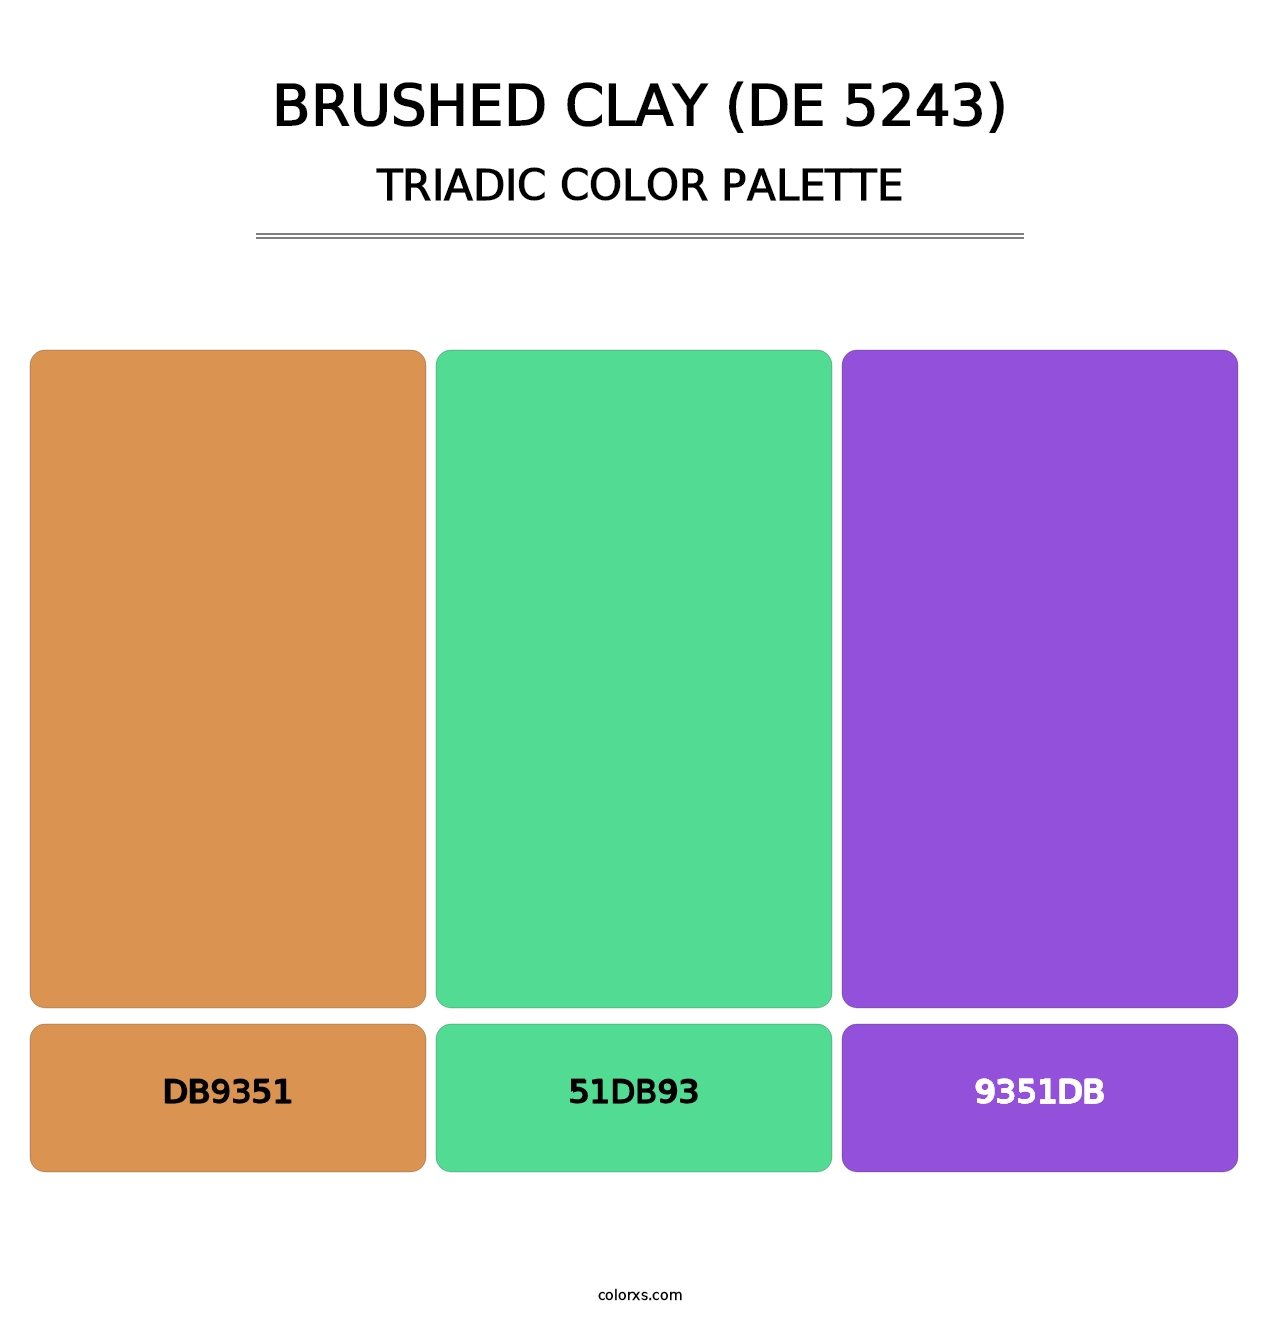 Brushed Clay (DE 5243) - Triadic Color Palette